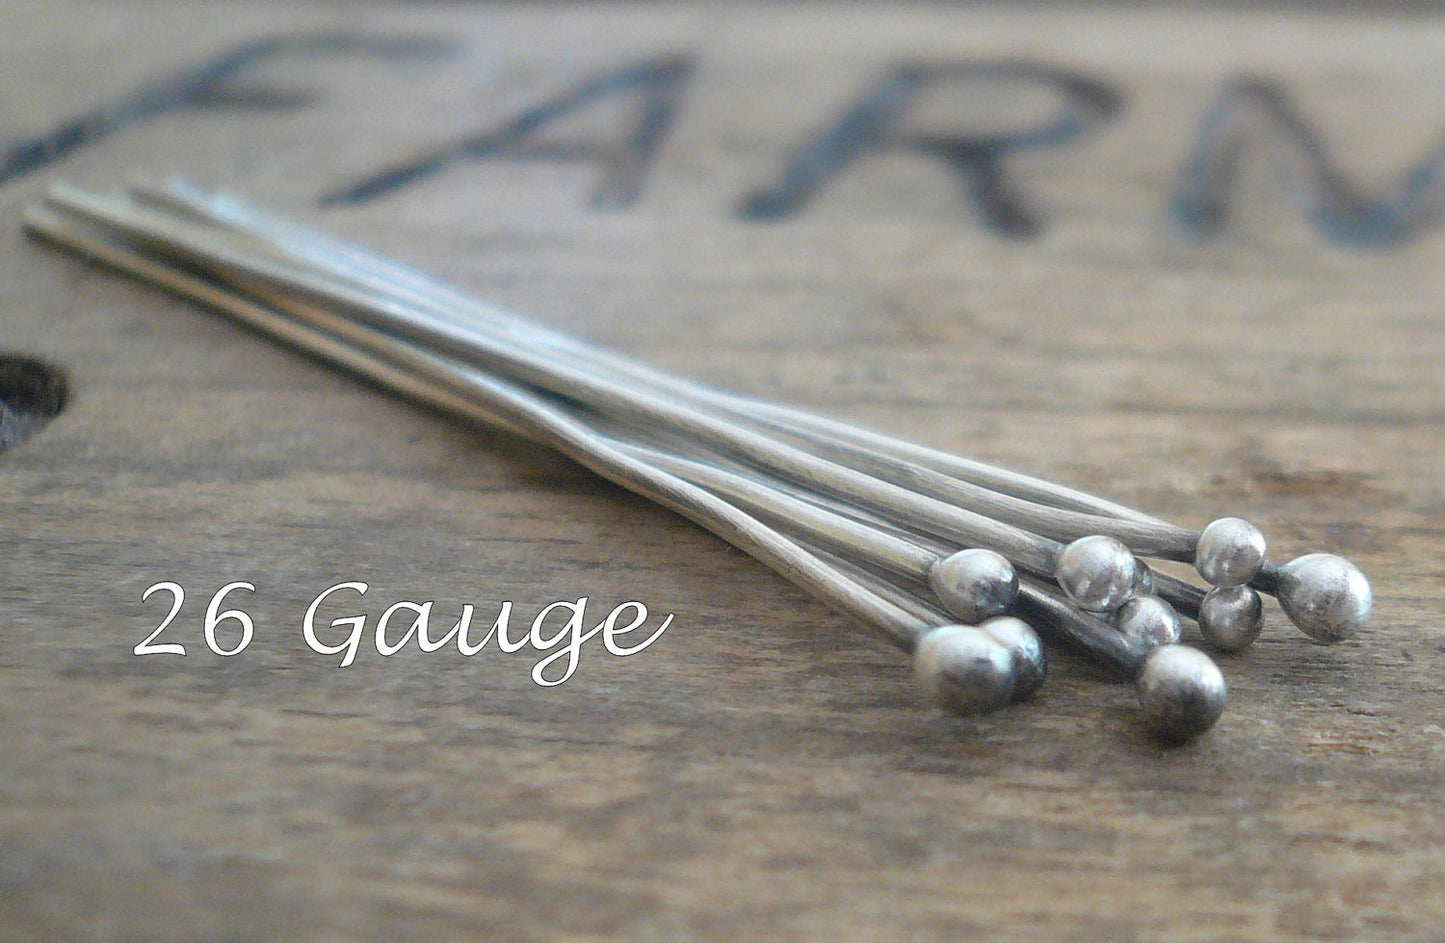 10 3" Fine Silver 26 GAUGE Handmade Ball Headpins - 3 inches. Oxidized and polished